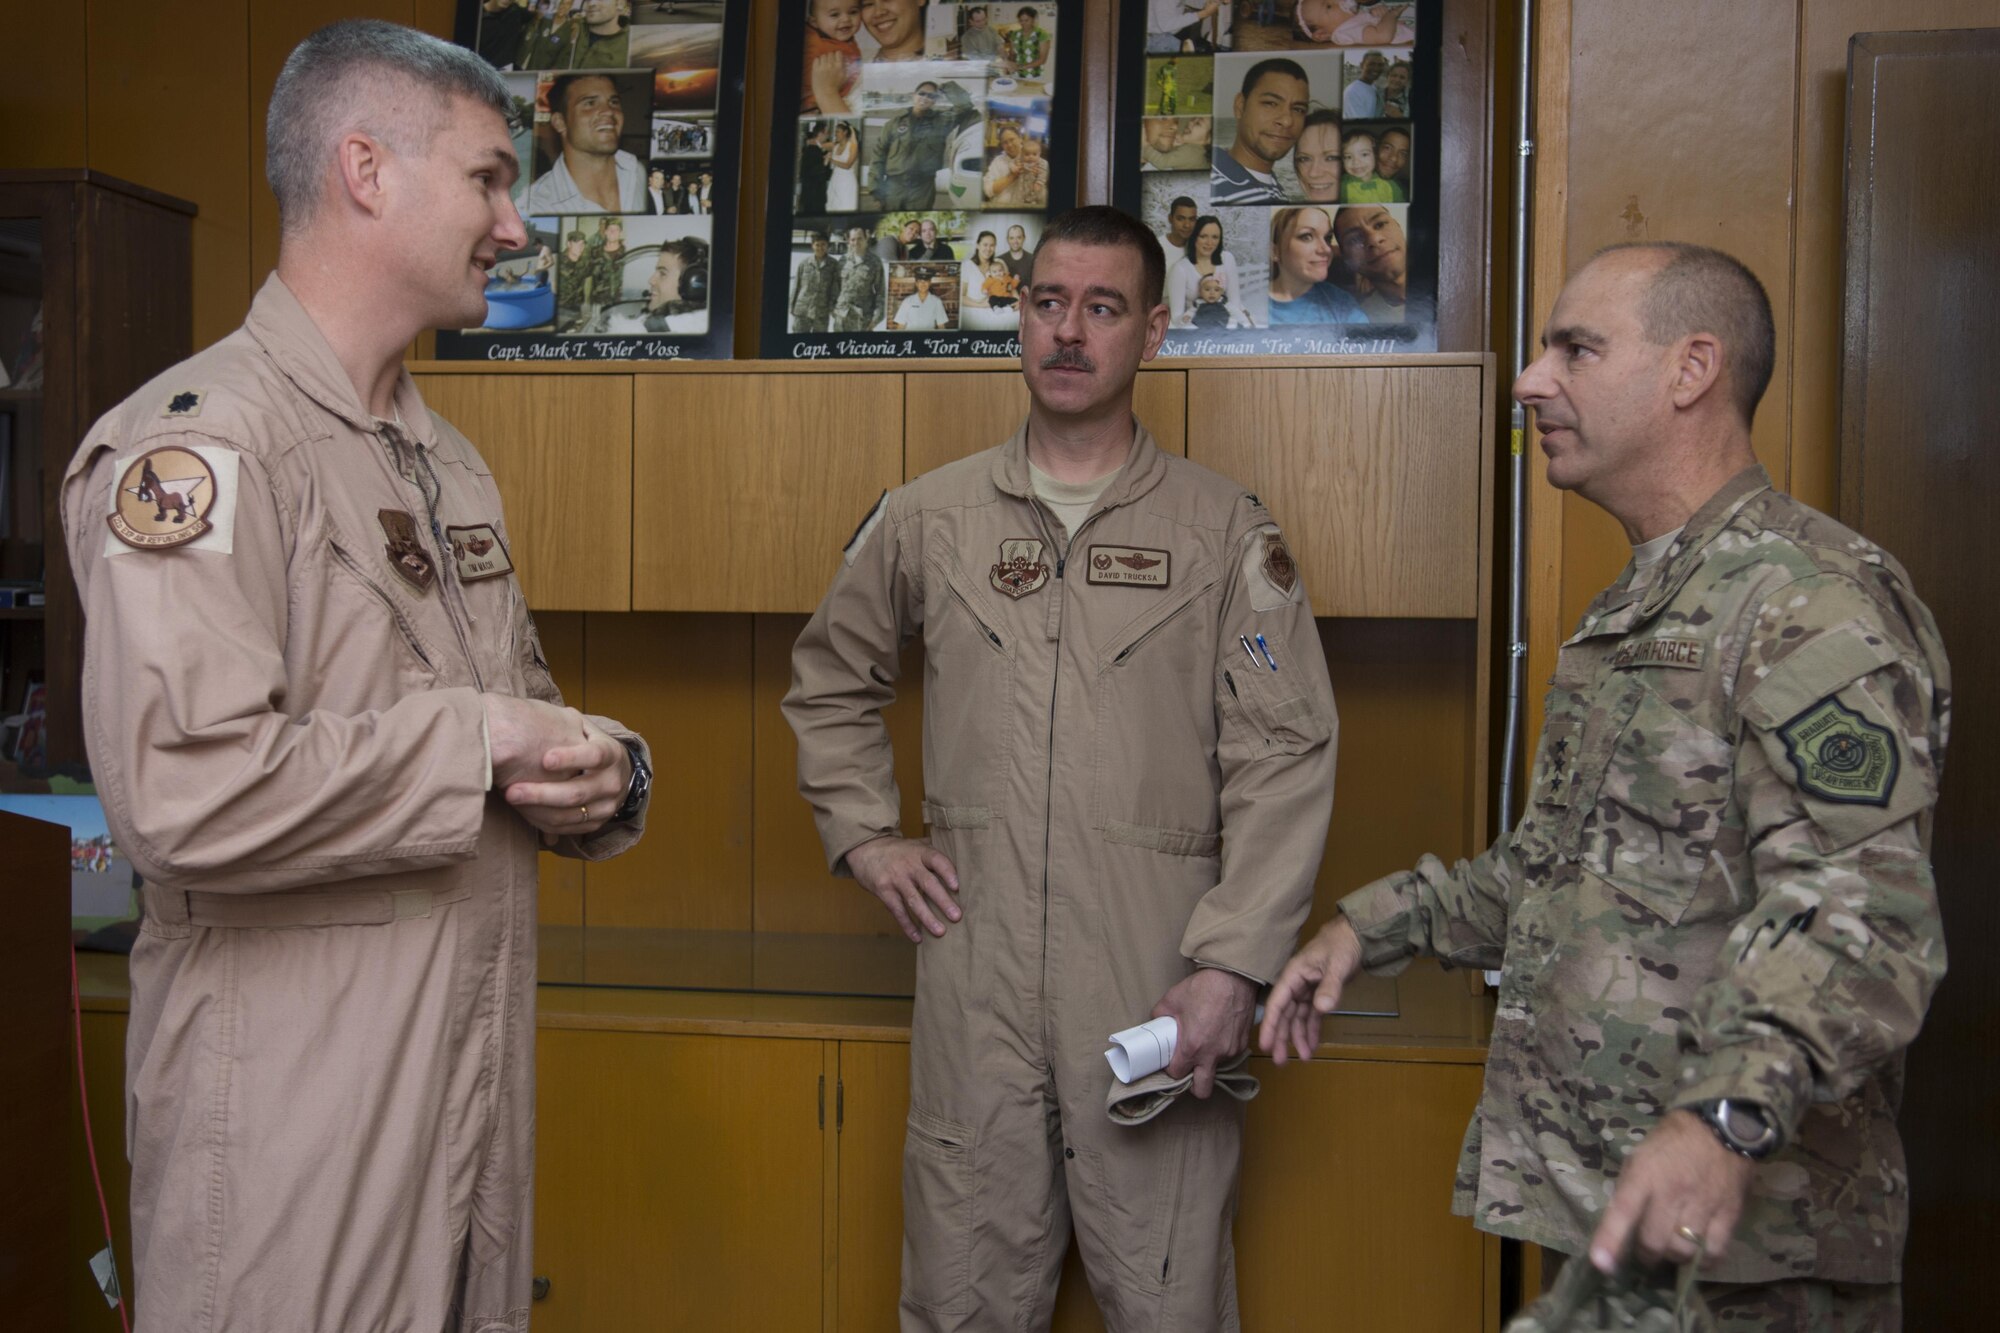 U.S. Air Force Lt. Gen. Jeffrey Harrigian, U.S. Air Forces Central Command commander is briefed by Lt. Col Timothy Mach, 22nd Expeditionary Air Refueling Squadron commander, on the day-to-day operations at Incirlik Air Base, Turkey, Aug. 28, 2016. Harrigian learned about the base’s capabilities and visited Airmen deployed here in support of Operation Inherent Resolve. (U.S. Air Force photo by Staff Sgt. Ciara Gosier)